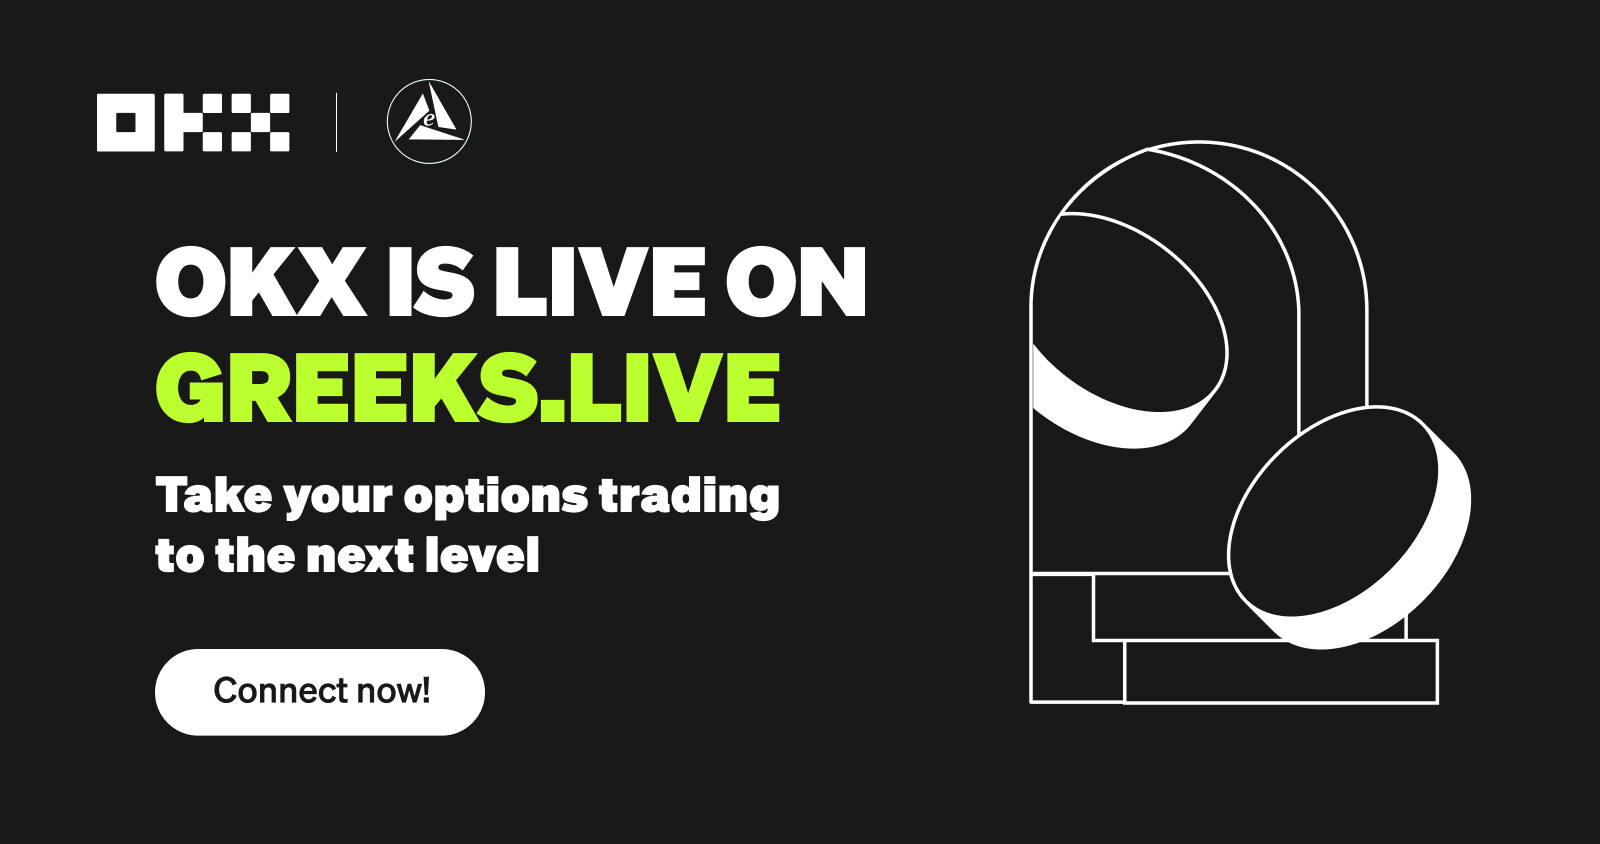 Boost your options trading with our Greeks.live integration